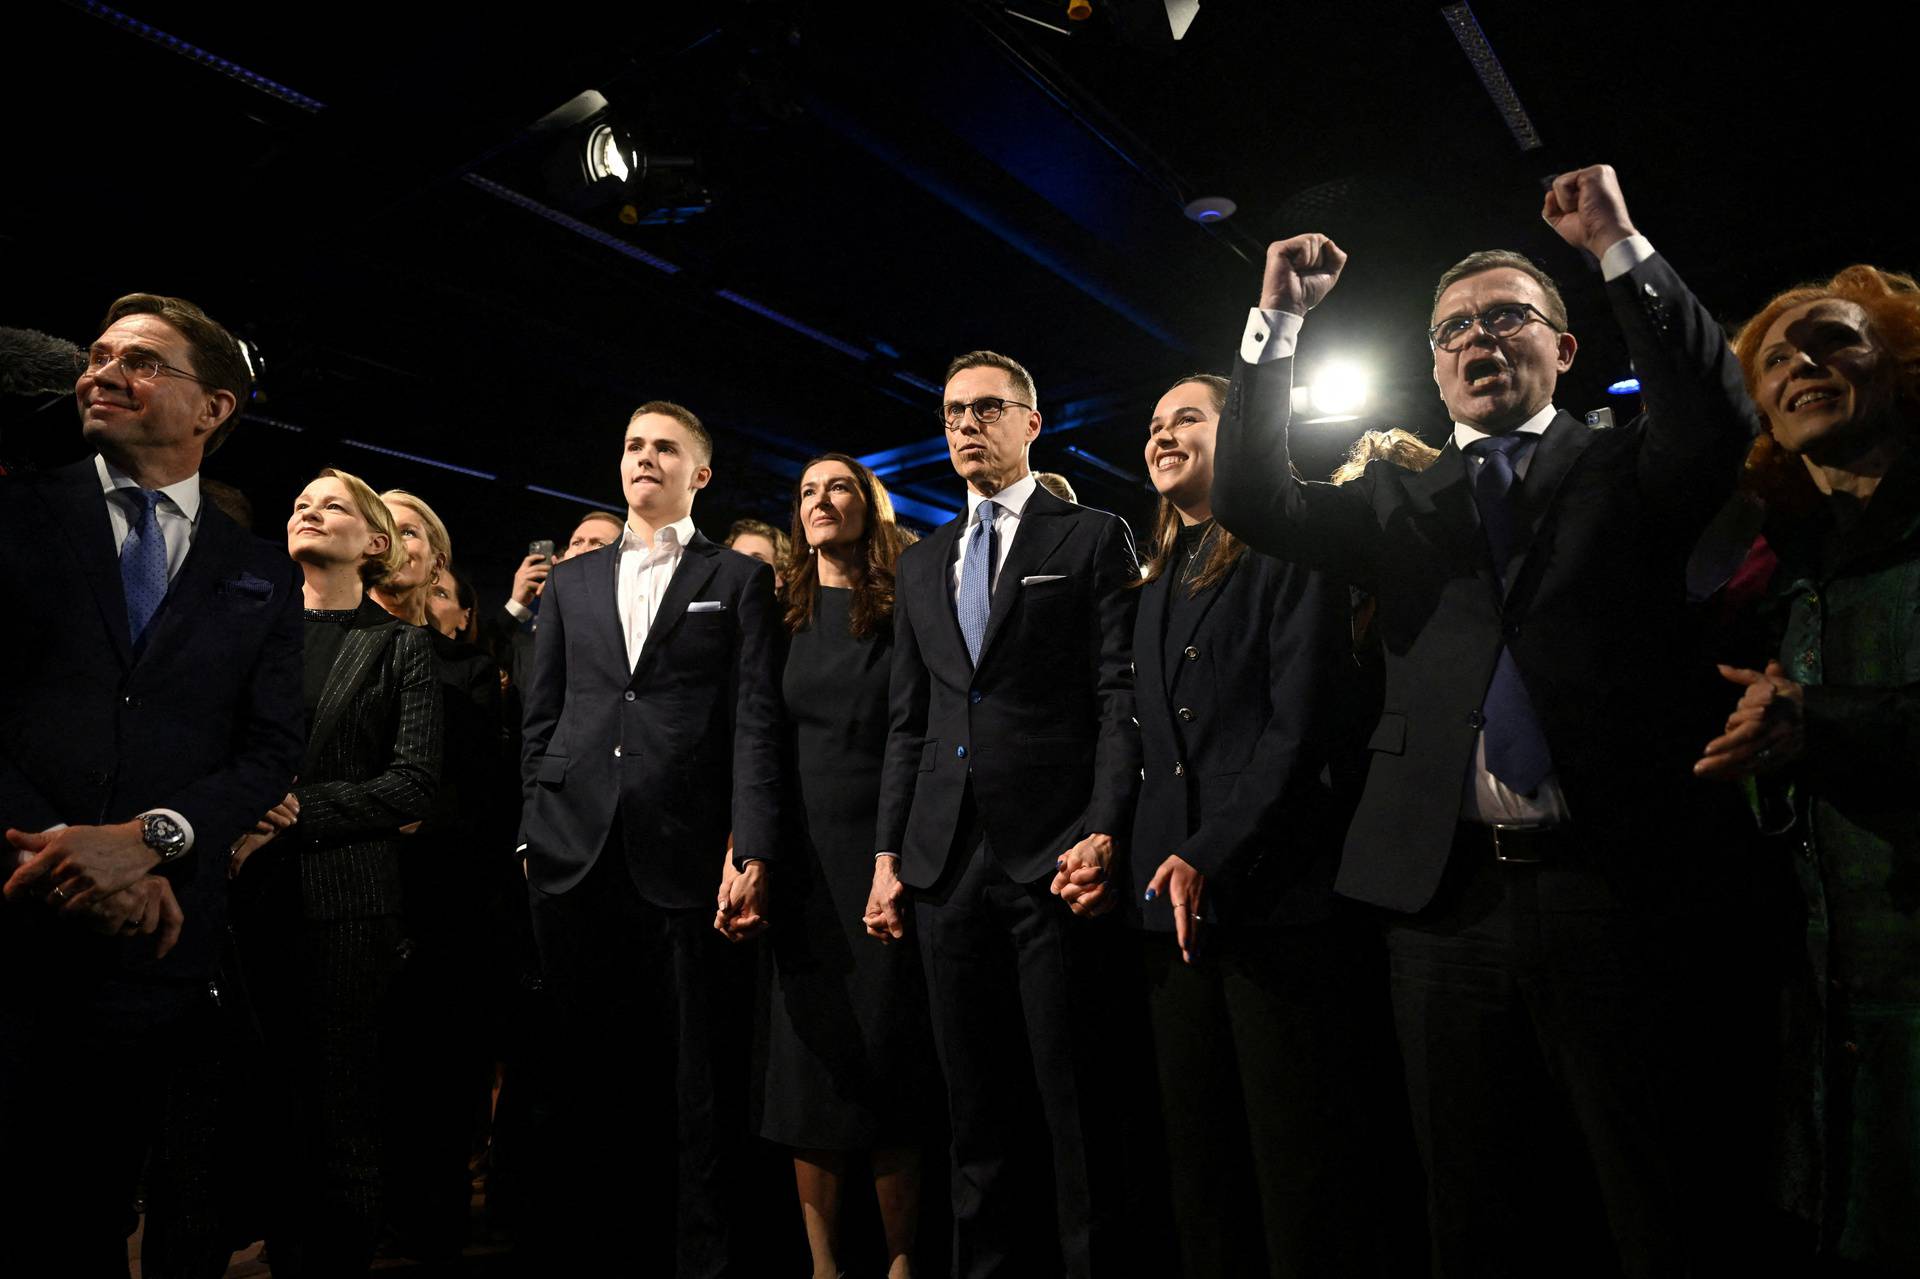 Election reception of NCP presidential candidate Alexander Stubb in Helsinki